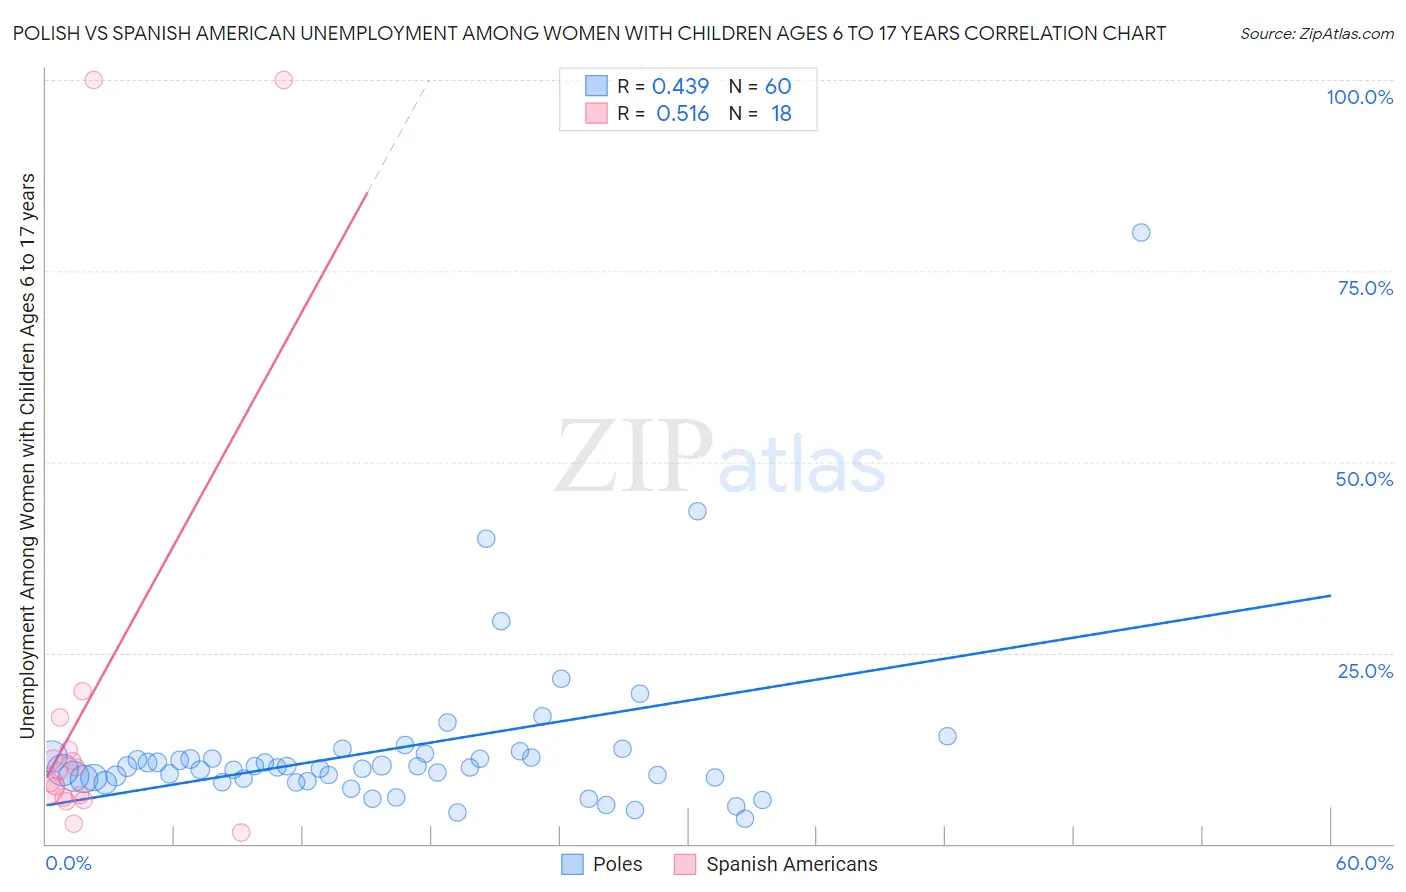 Polish vs Spanish American Unemployment Among Women with Children Ages 6 to 17 years